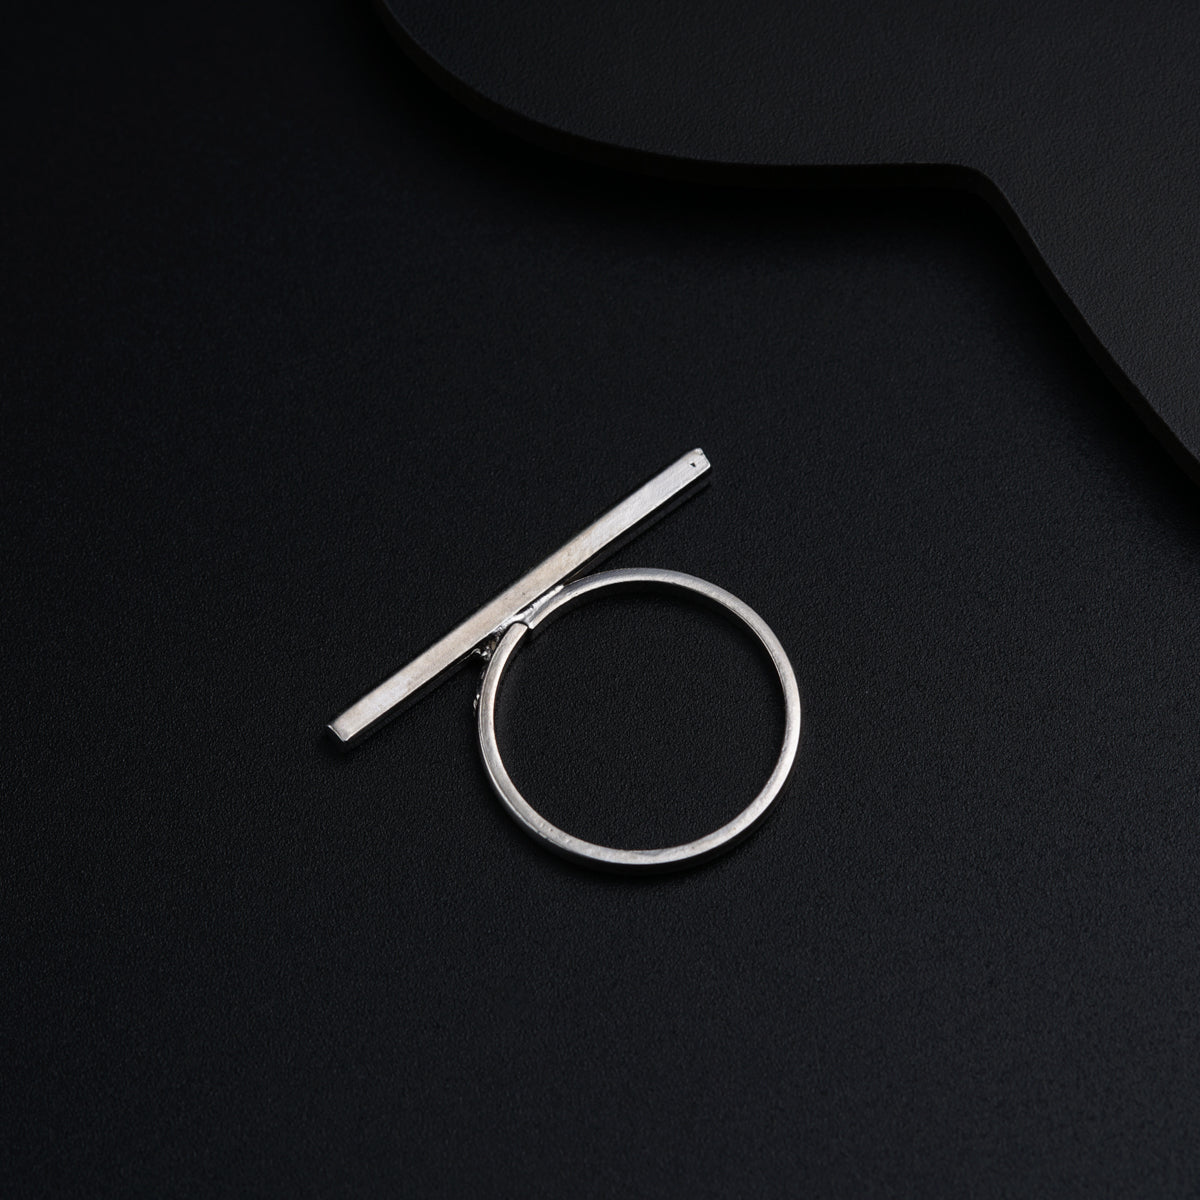 a pair of scissors sitting on top of a black surface